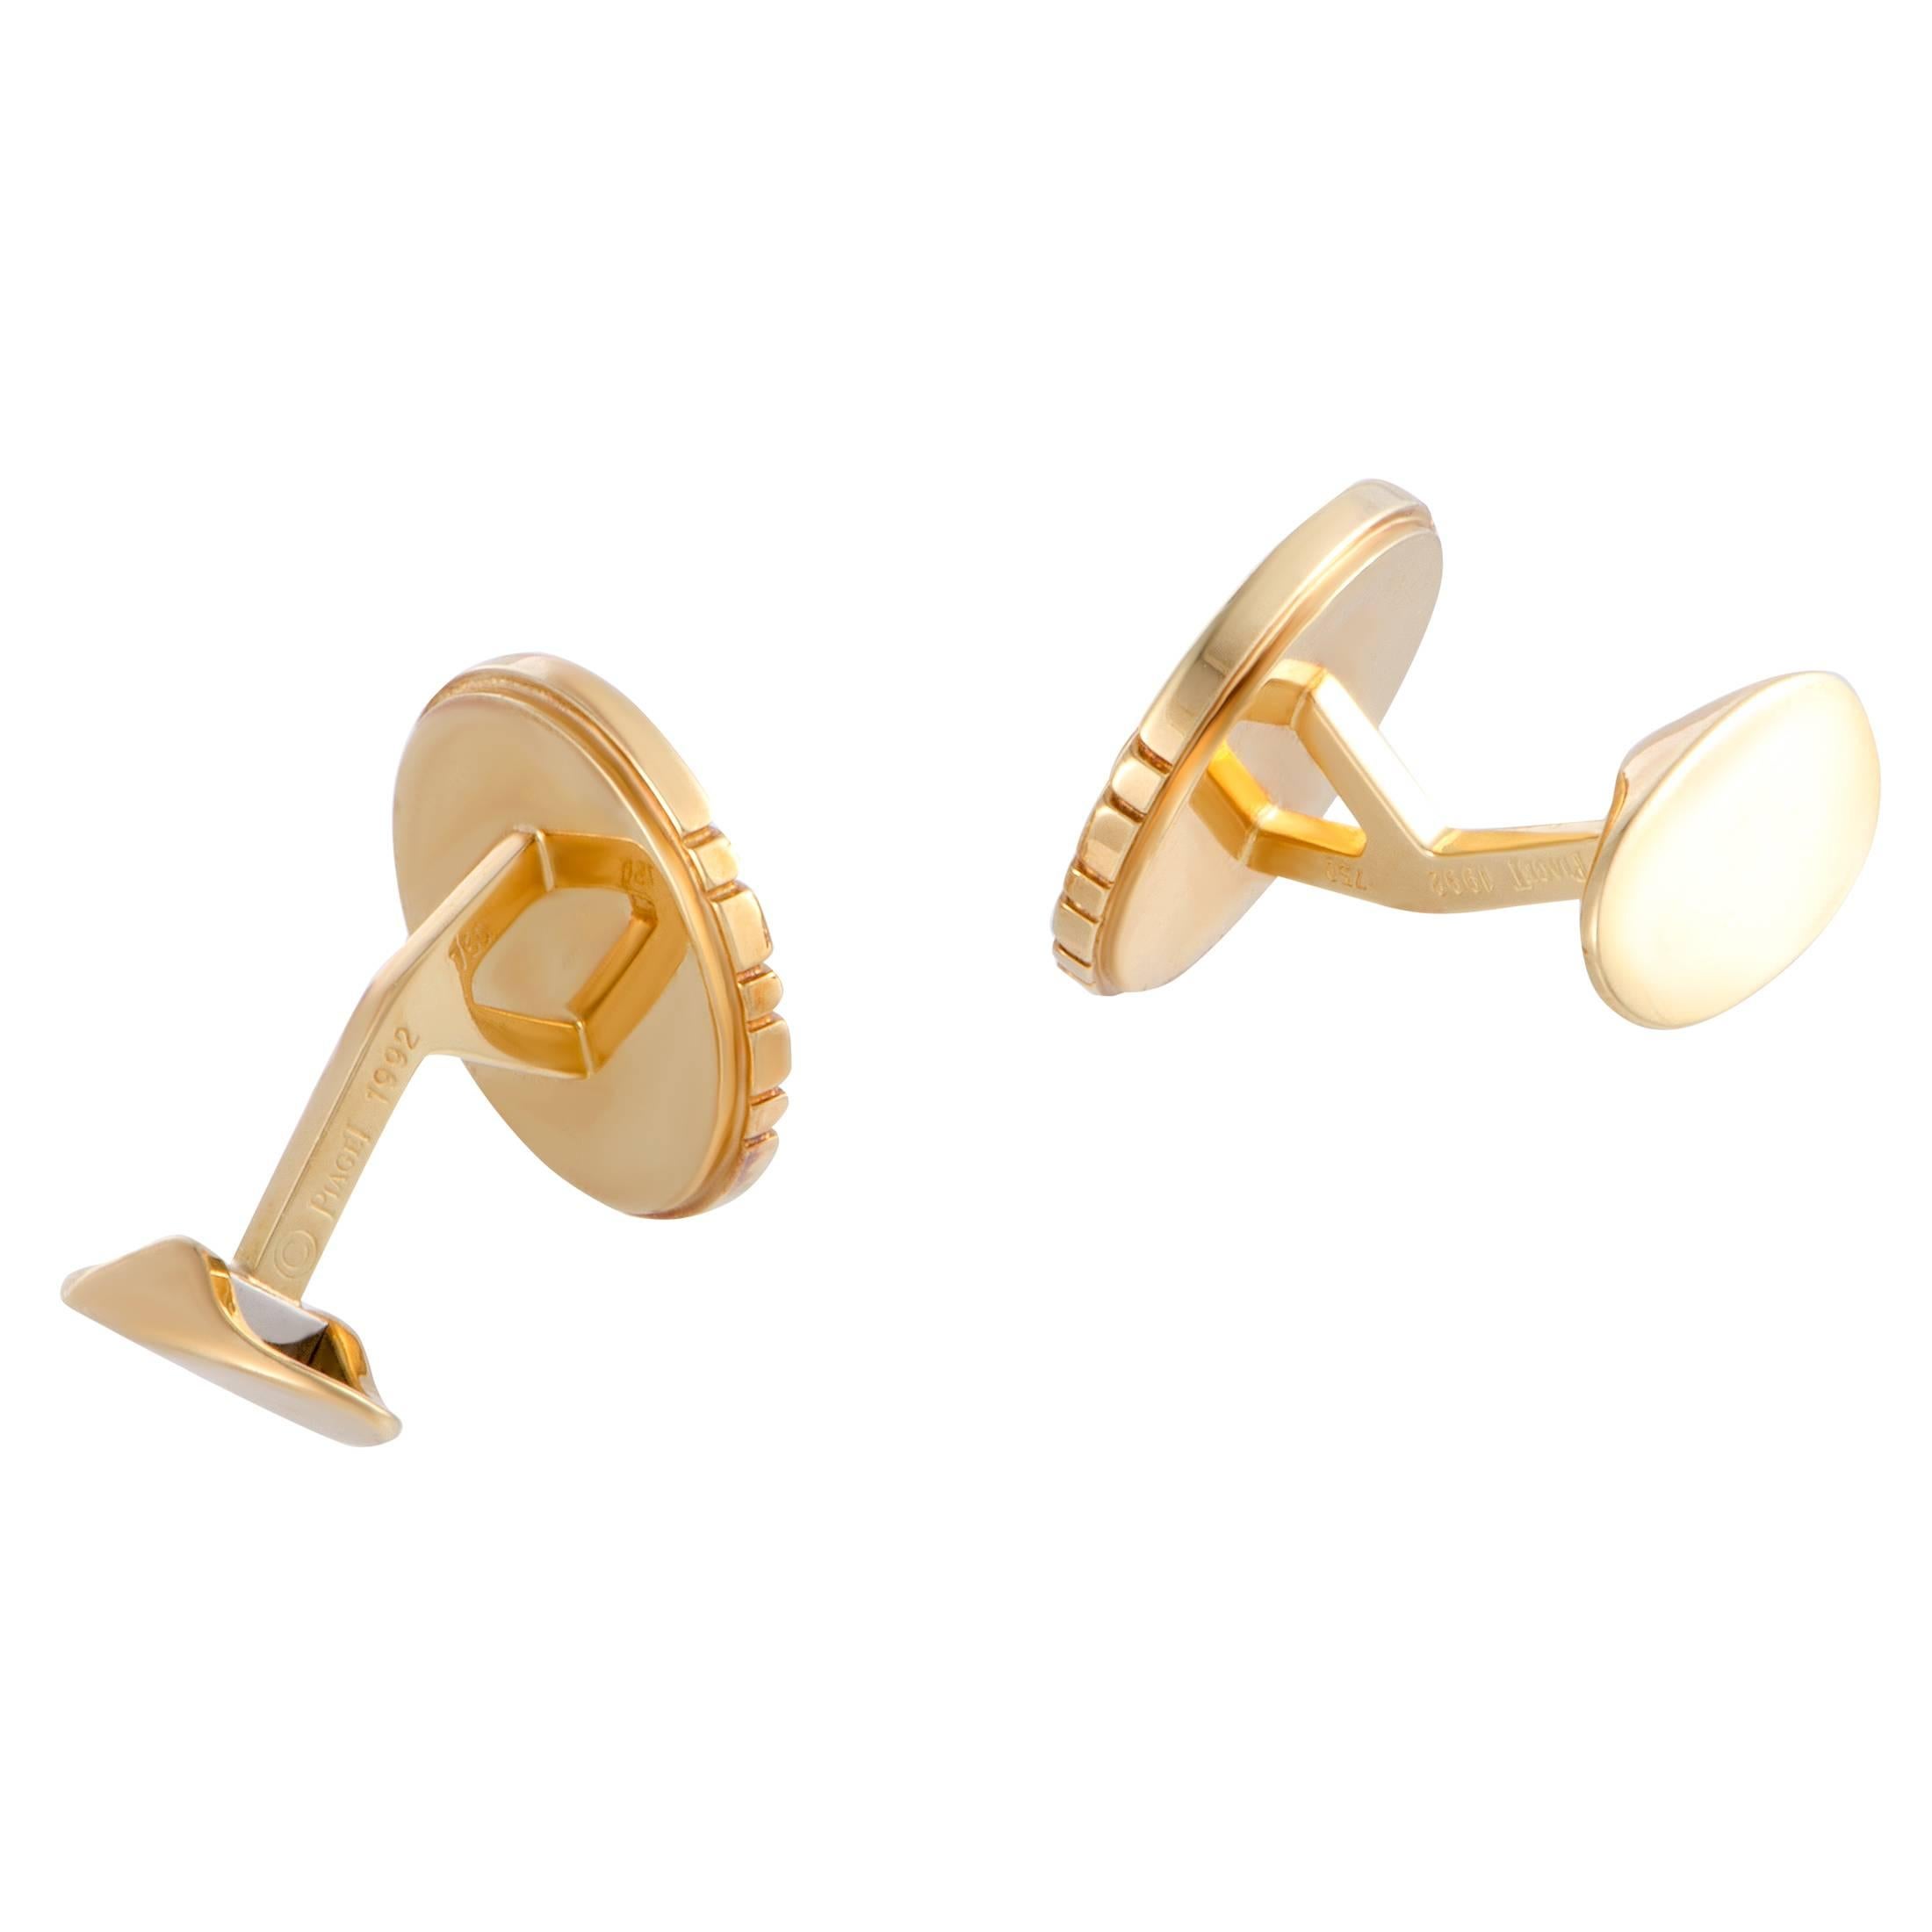 These charming cufflinks by Piaget are elegantly designed in shimmering 18K yellow gold. The classy pair of cufflinks feature 0.60ct of sparkling F-color, VVS-clarity diamonds in its spectacular design that boast a fashionably charming appeal.
